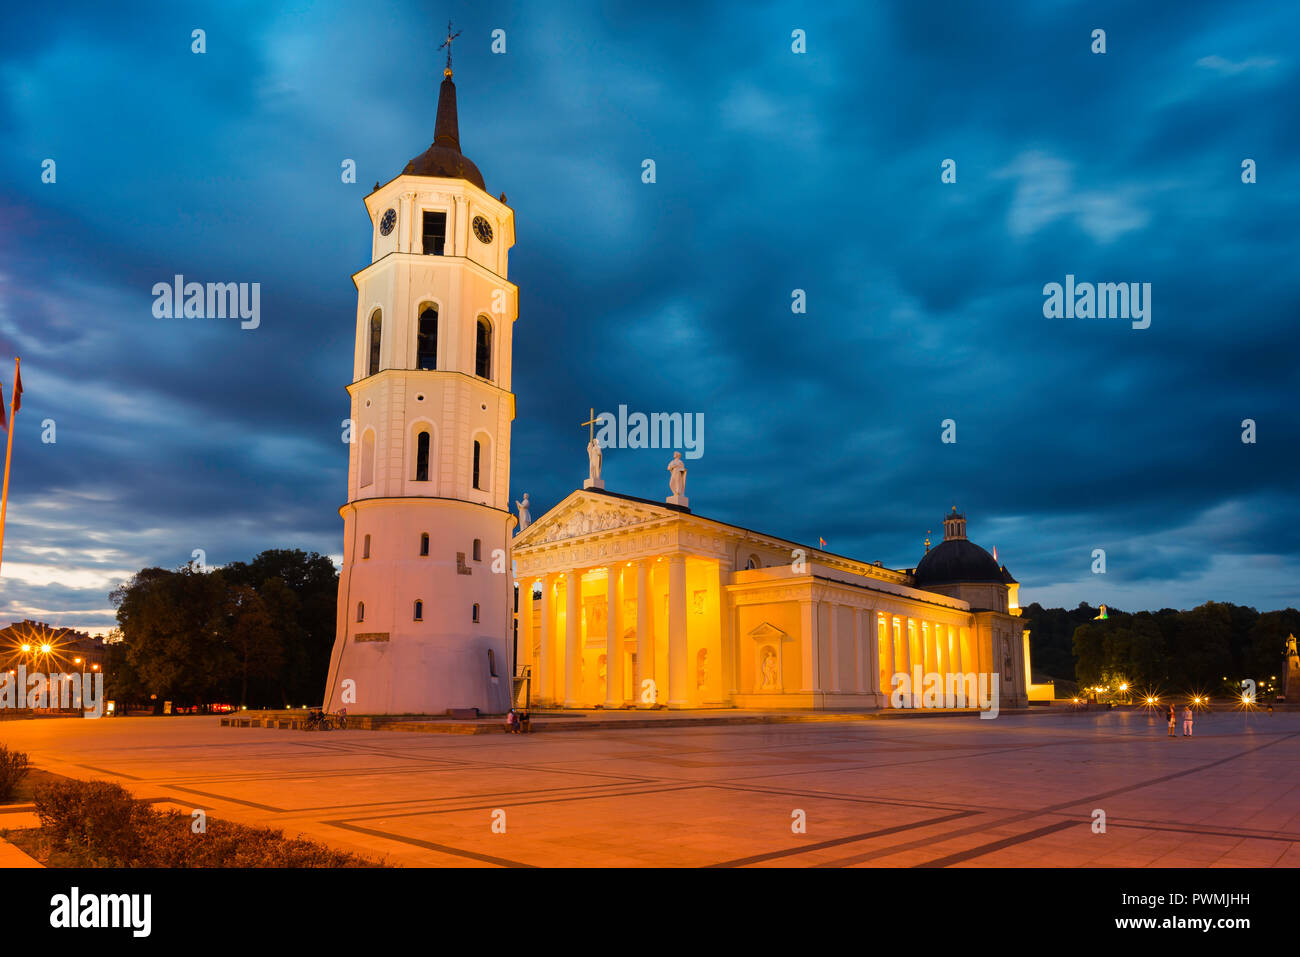 Vilnius Lithuania Cathedral Square, view at night of scenic Vilnius Cathedral and the Belfry bell tower in the city's main square, Baltic States. Stock Photo